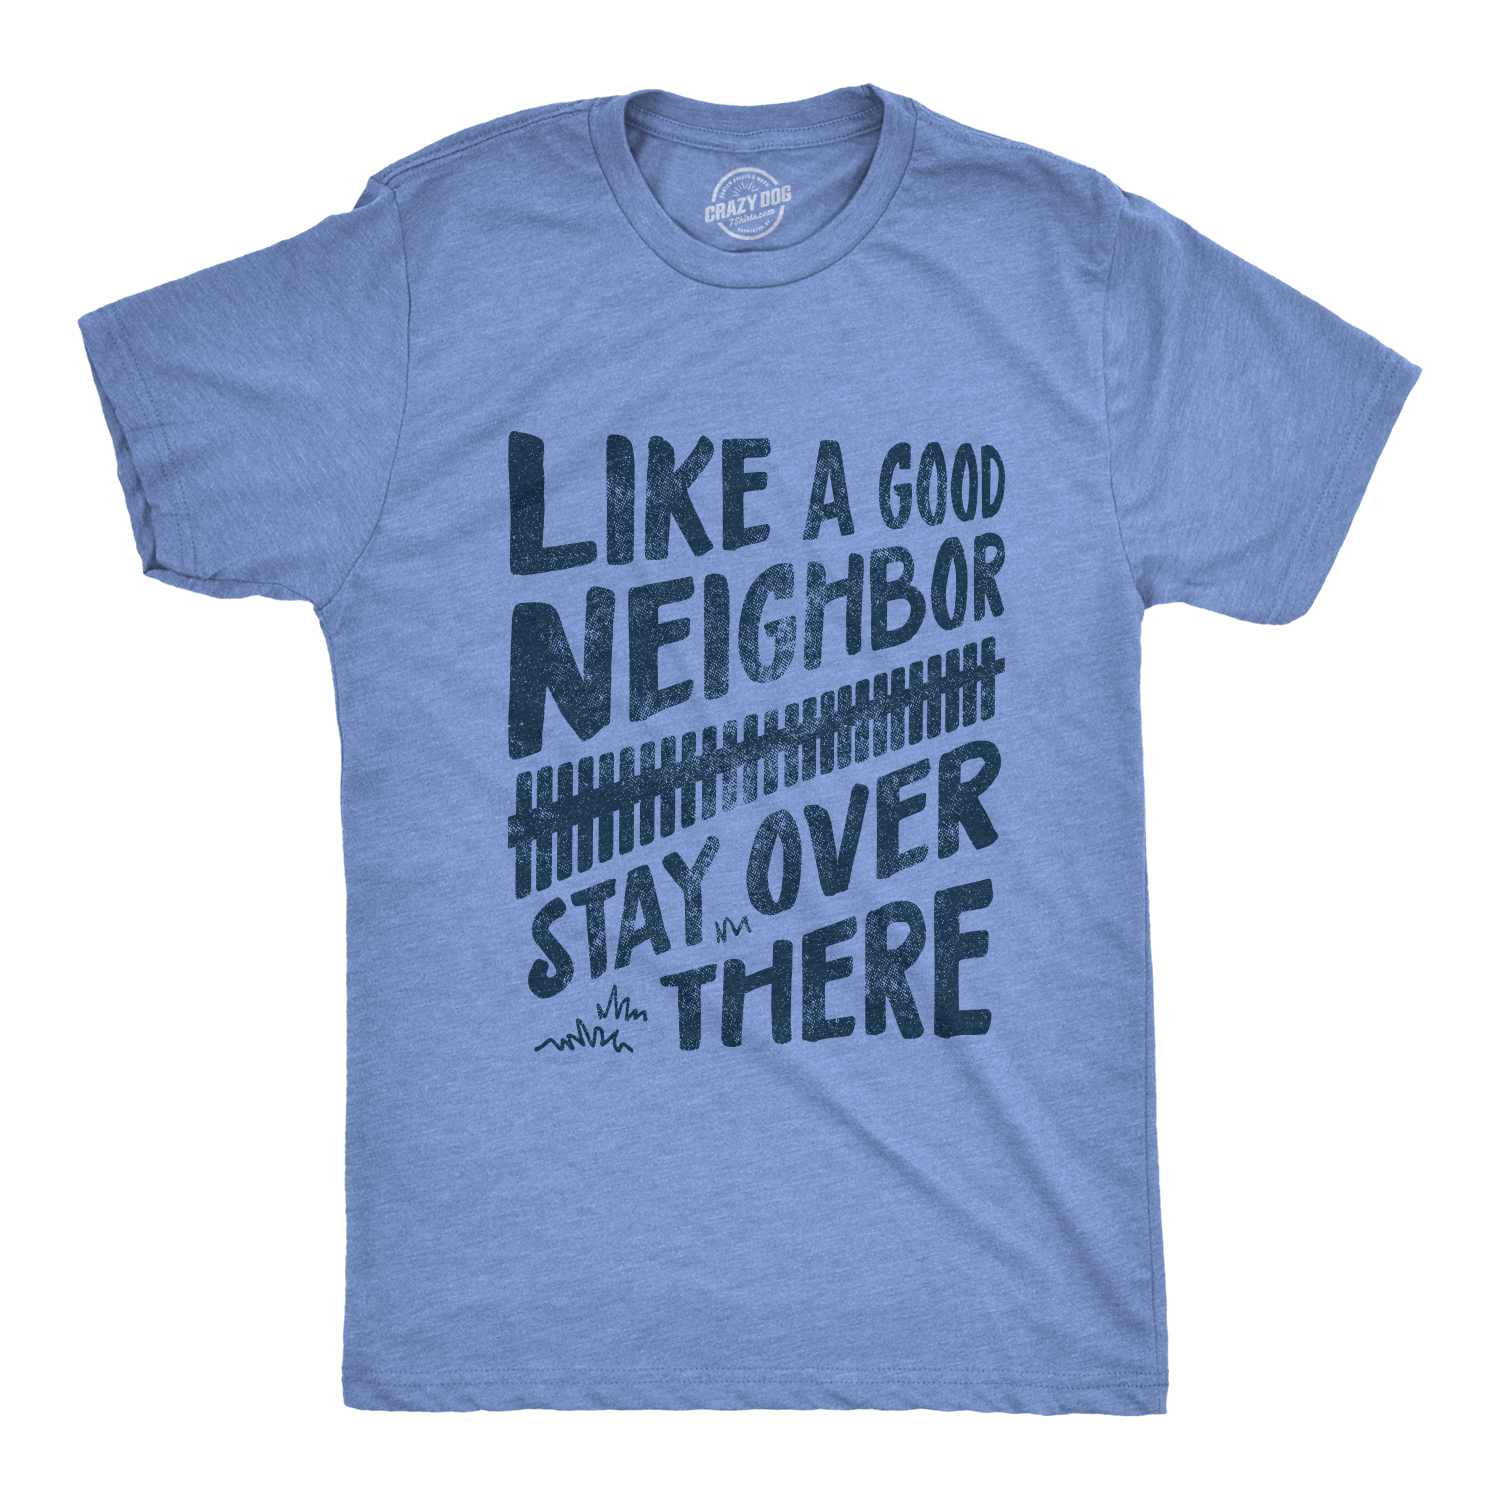 Crazy Dog Tshirts Mens Like A Good Neighbor Stay Over There Tshirt Funny Quarantine Social Distancing Tee